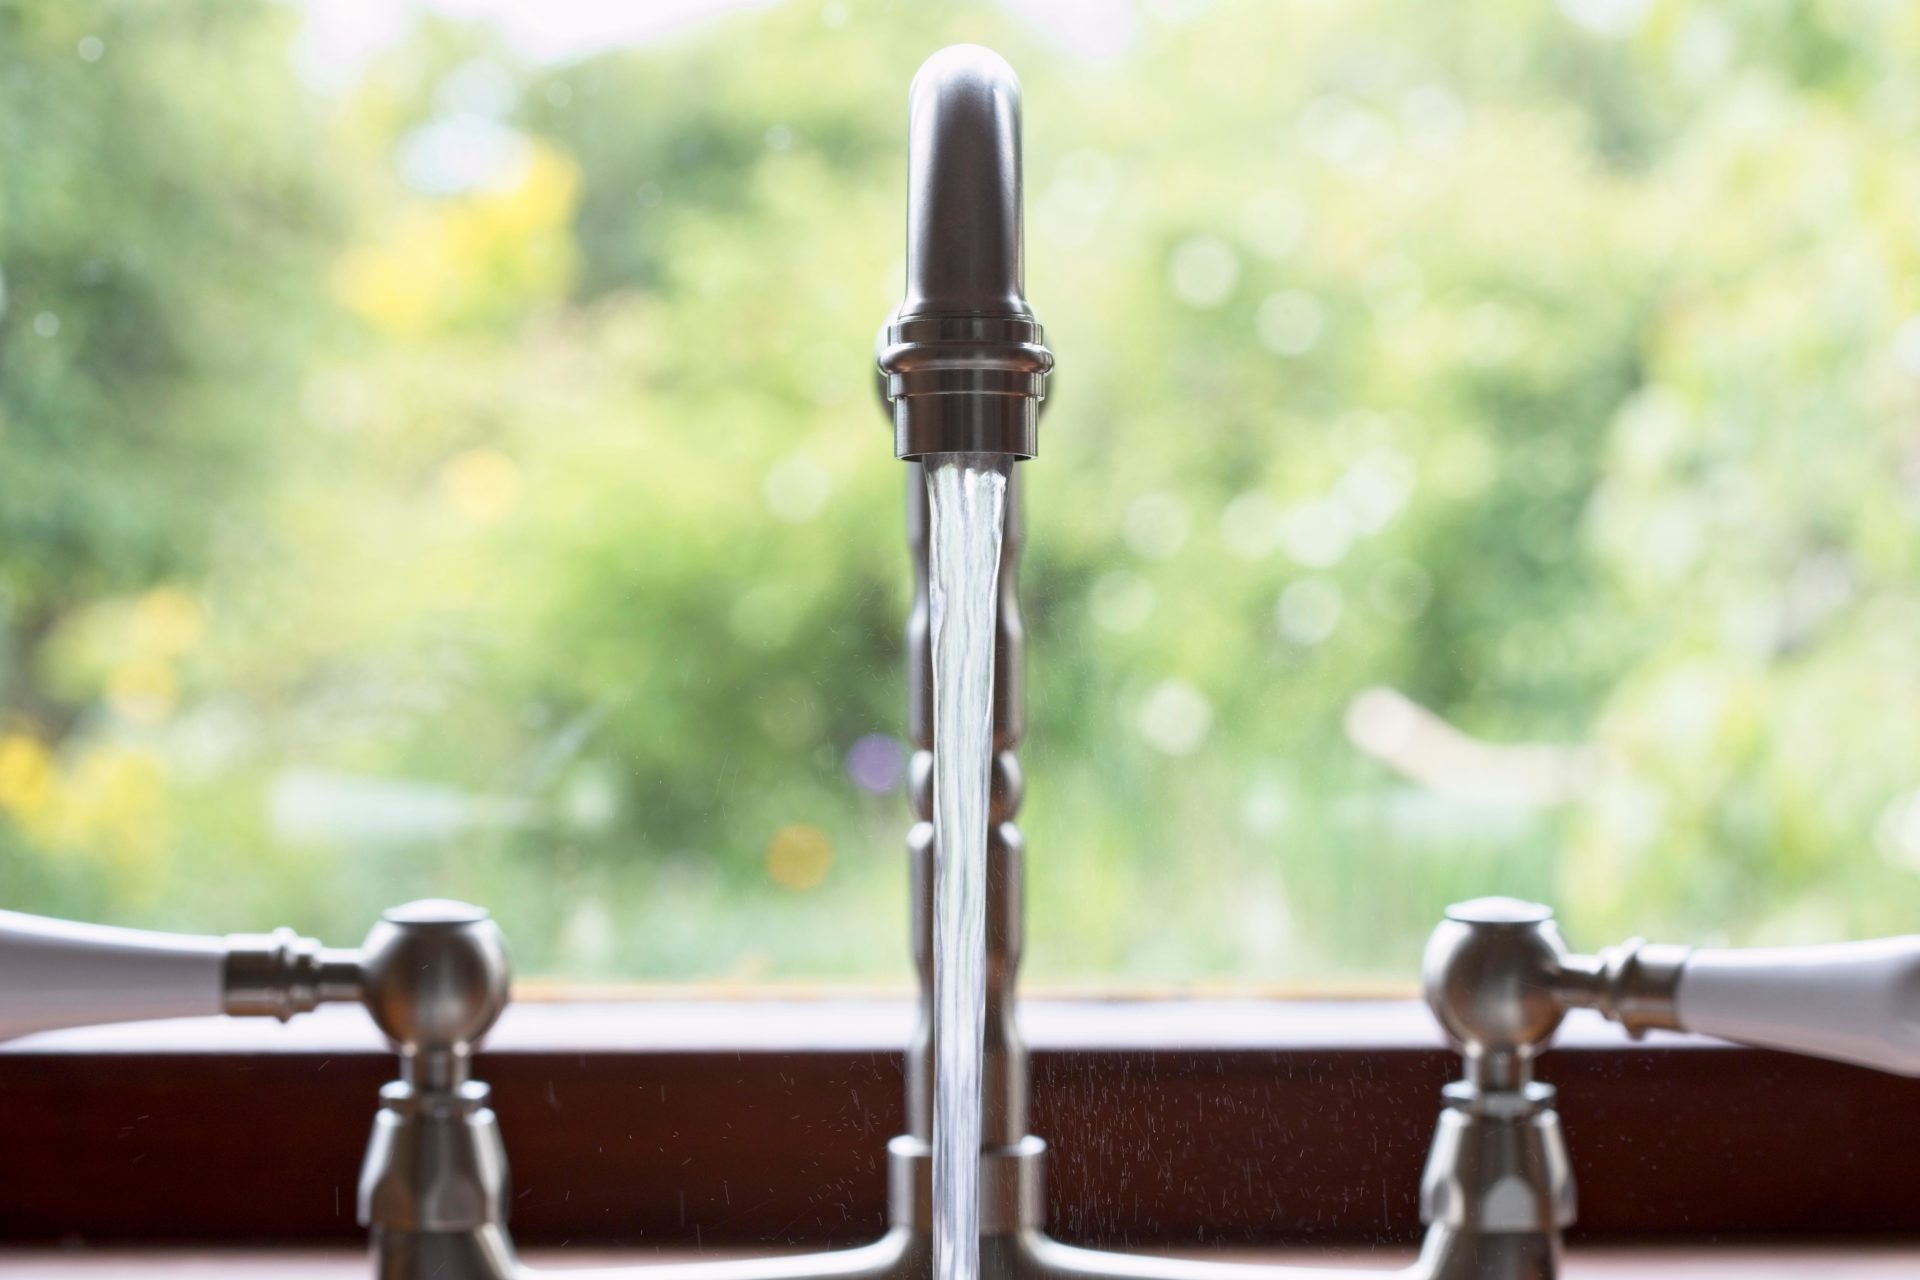 TB2F61 Kitchen taps left running and wasting water. Uk.